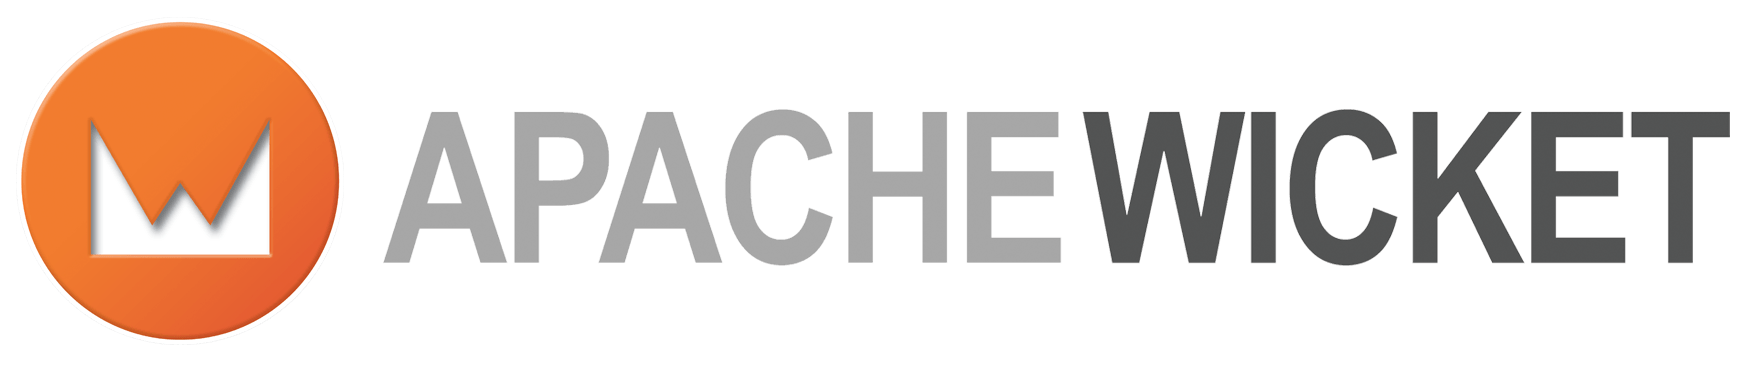 Org.Apache Logo - apache-wicket 8.3.0 - Download, Browsing & More | Fossies Archive